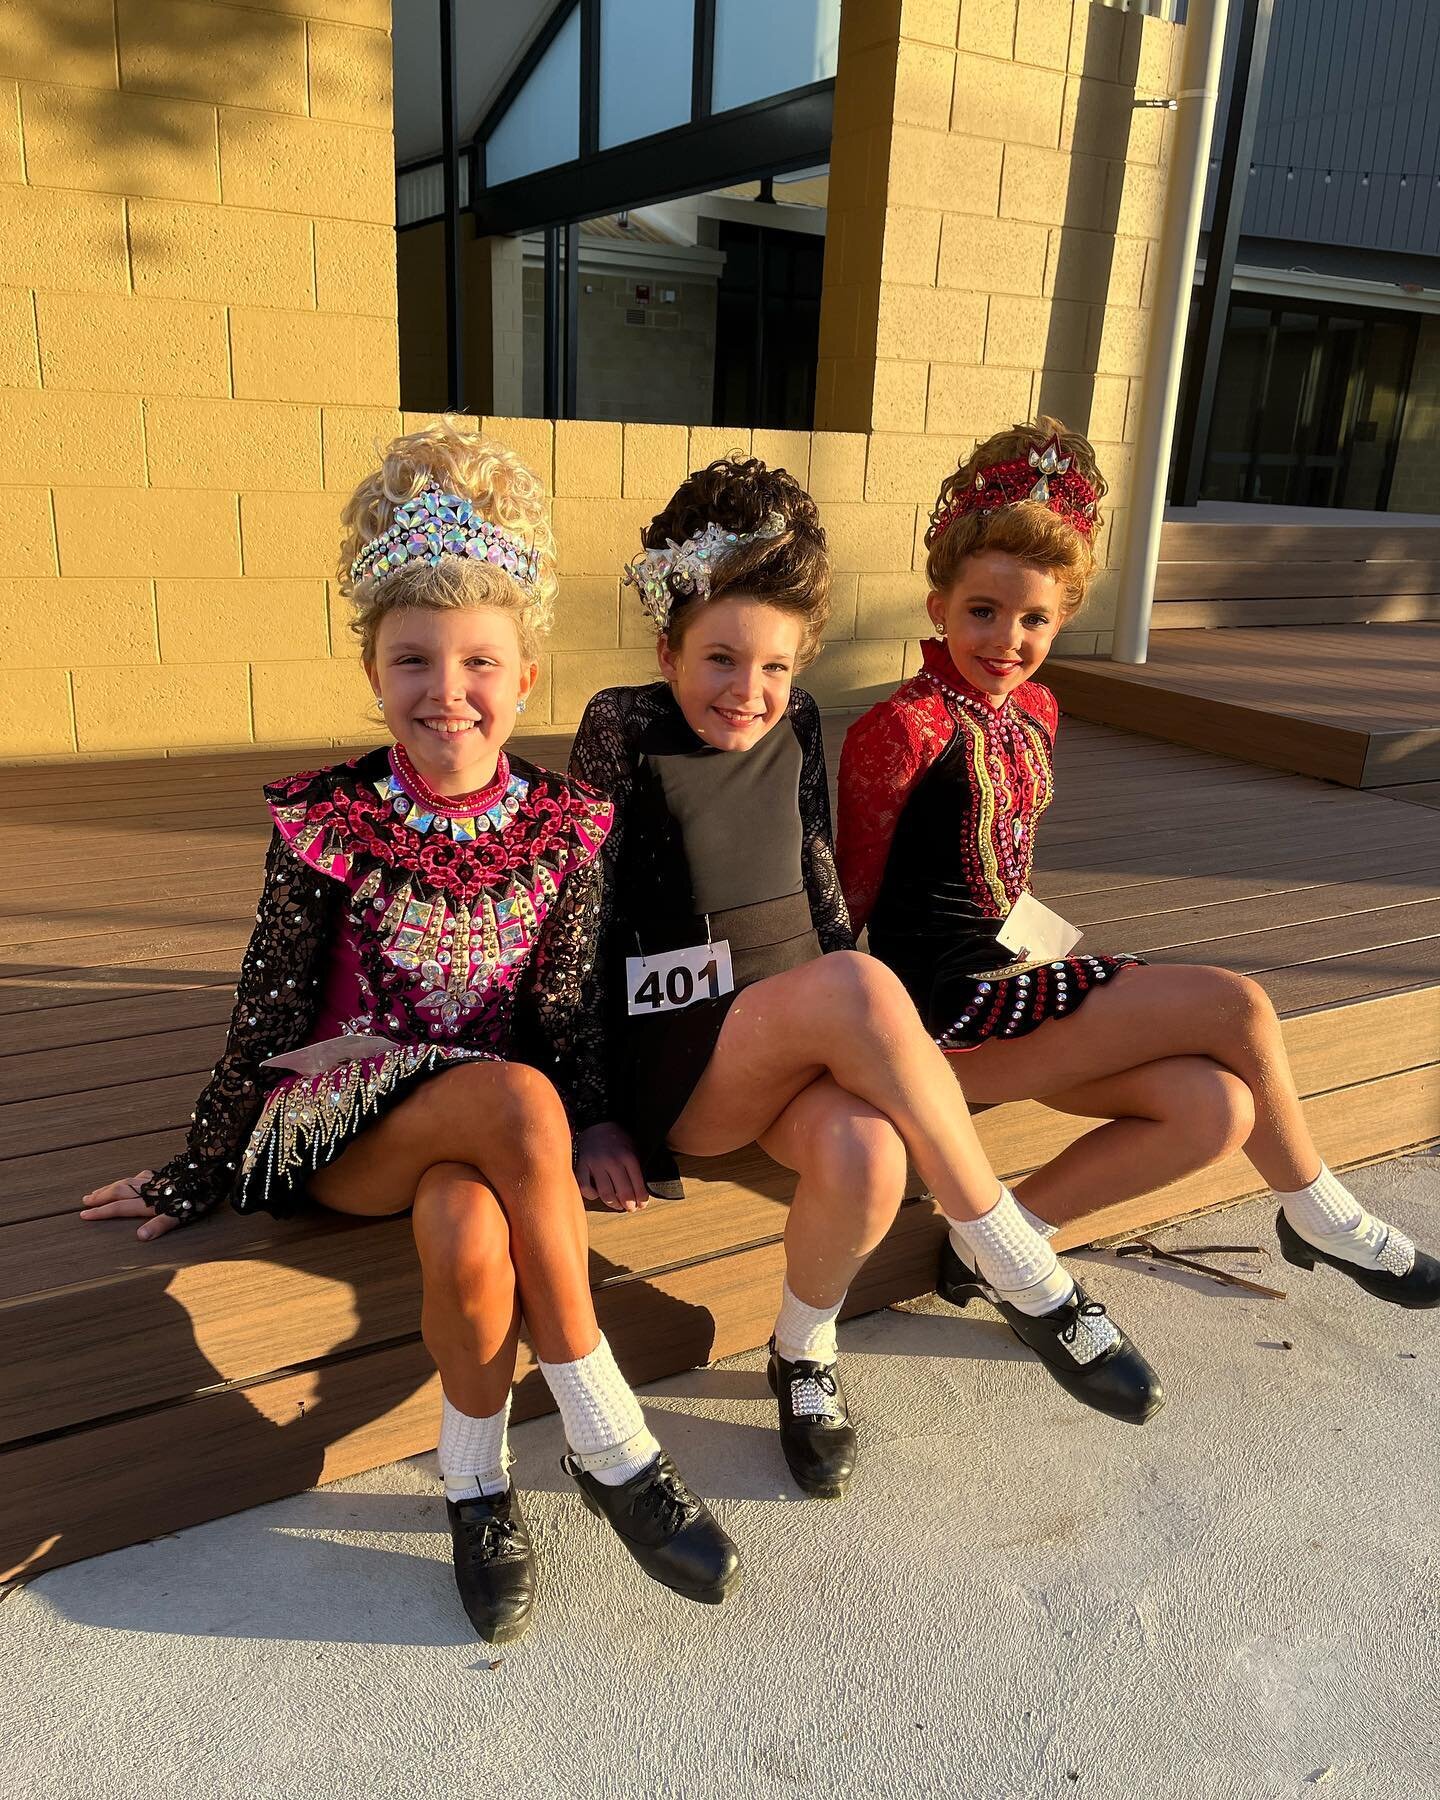 🍭 SWEETS OF MAY FEIS 🍭

Golden hour for our golden girls ☀️ 
Great job by our U12 dancers this afternoon, so proud of you all 🏆